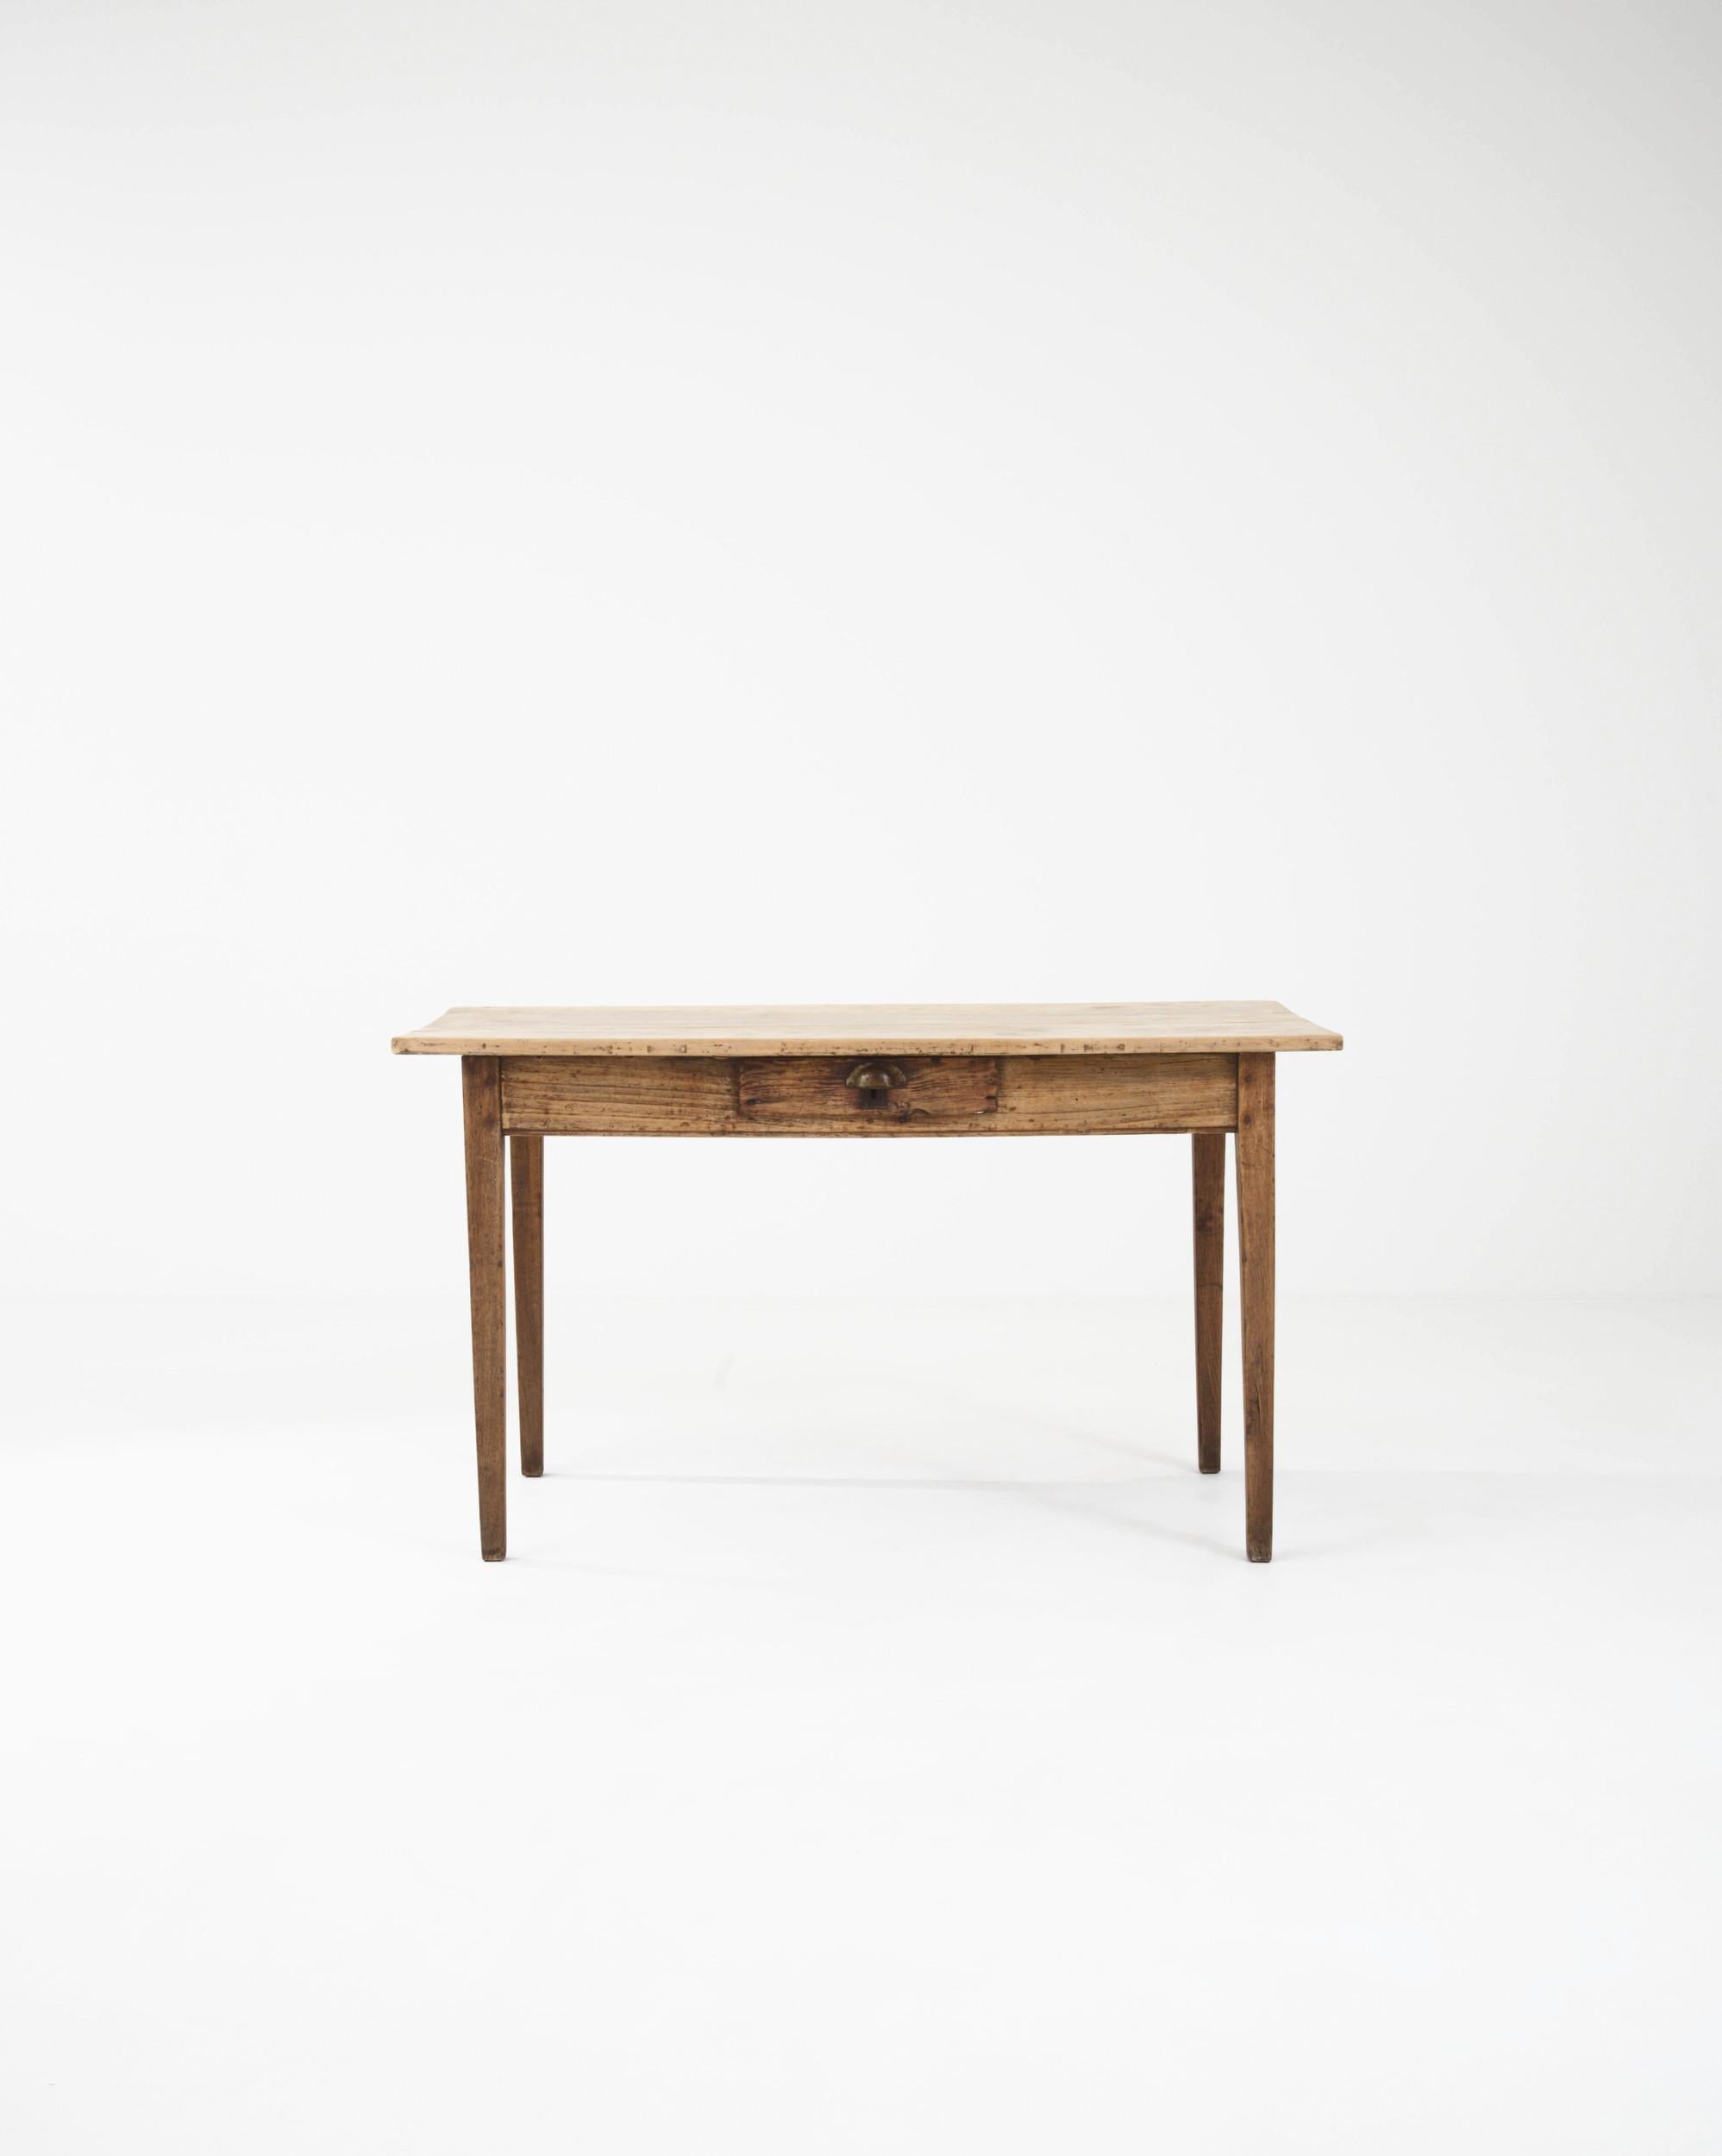 The simple design and warm finish of this antique wooden side table give it a timeless appeal. Hand-crafted in France in the 1800s, a rectangular tabletop sits atop an apron housing a small drawer, perfect for odds and ends. The subtle taper of the